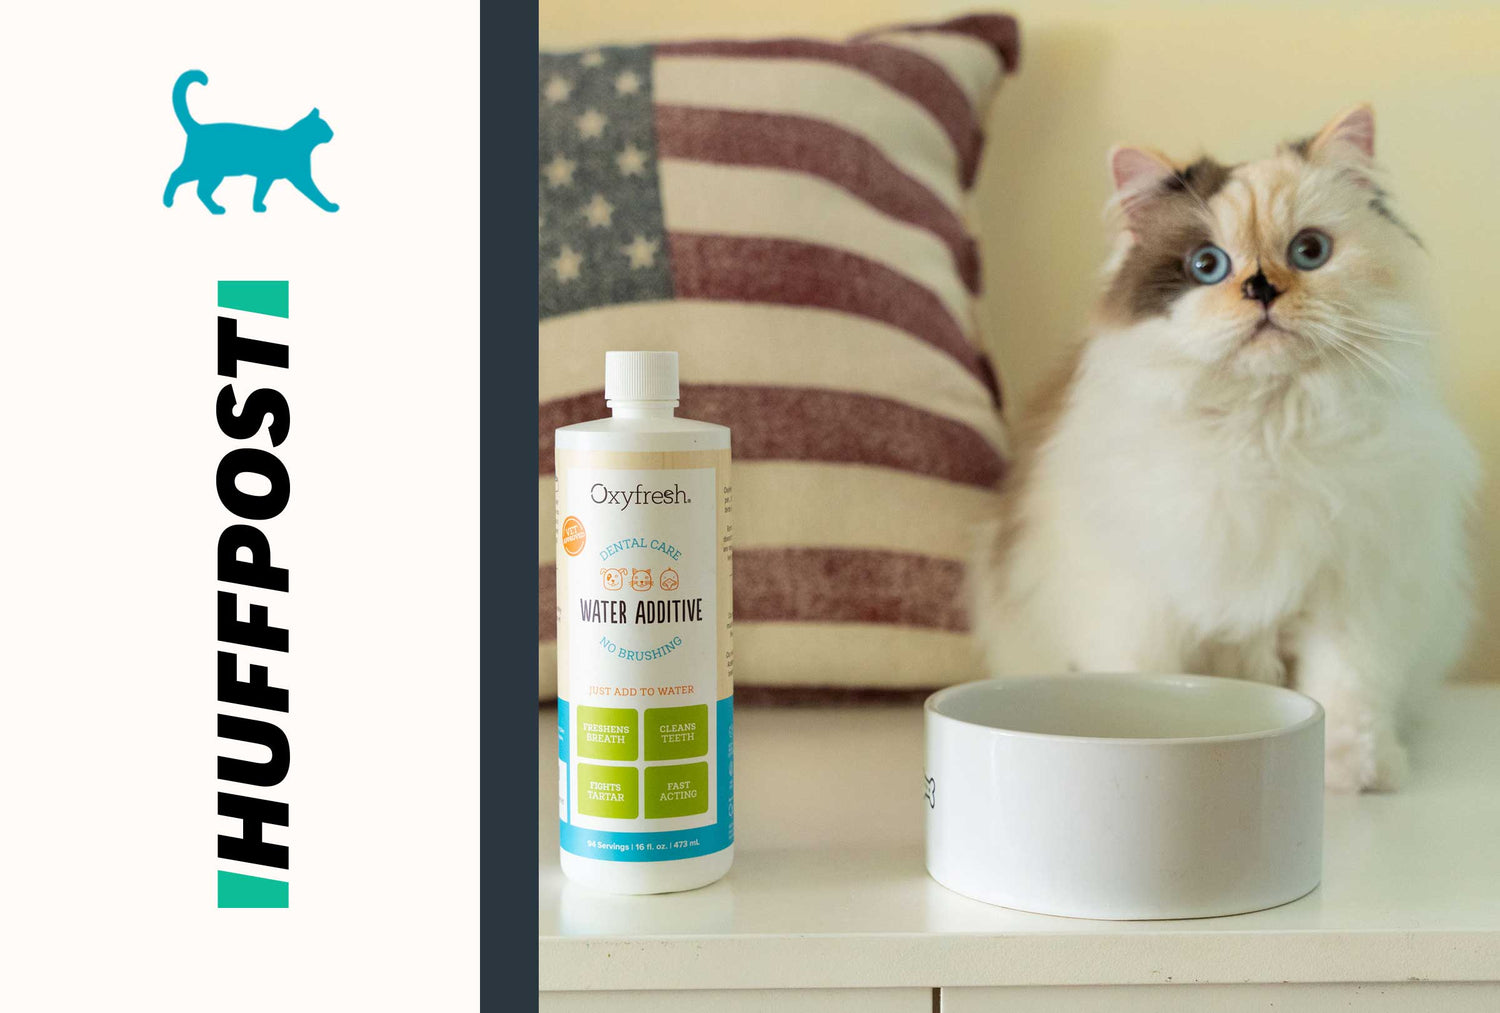 Oxyfresh Water Additive Featured as a ‘Lifesaver’ Product on HuffPost